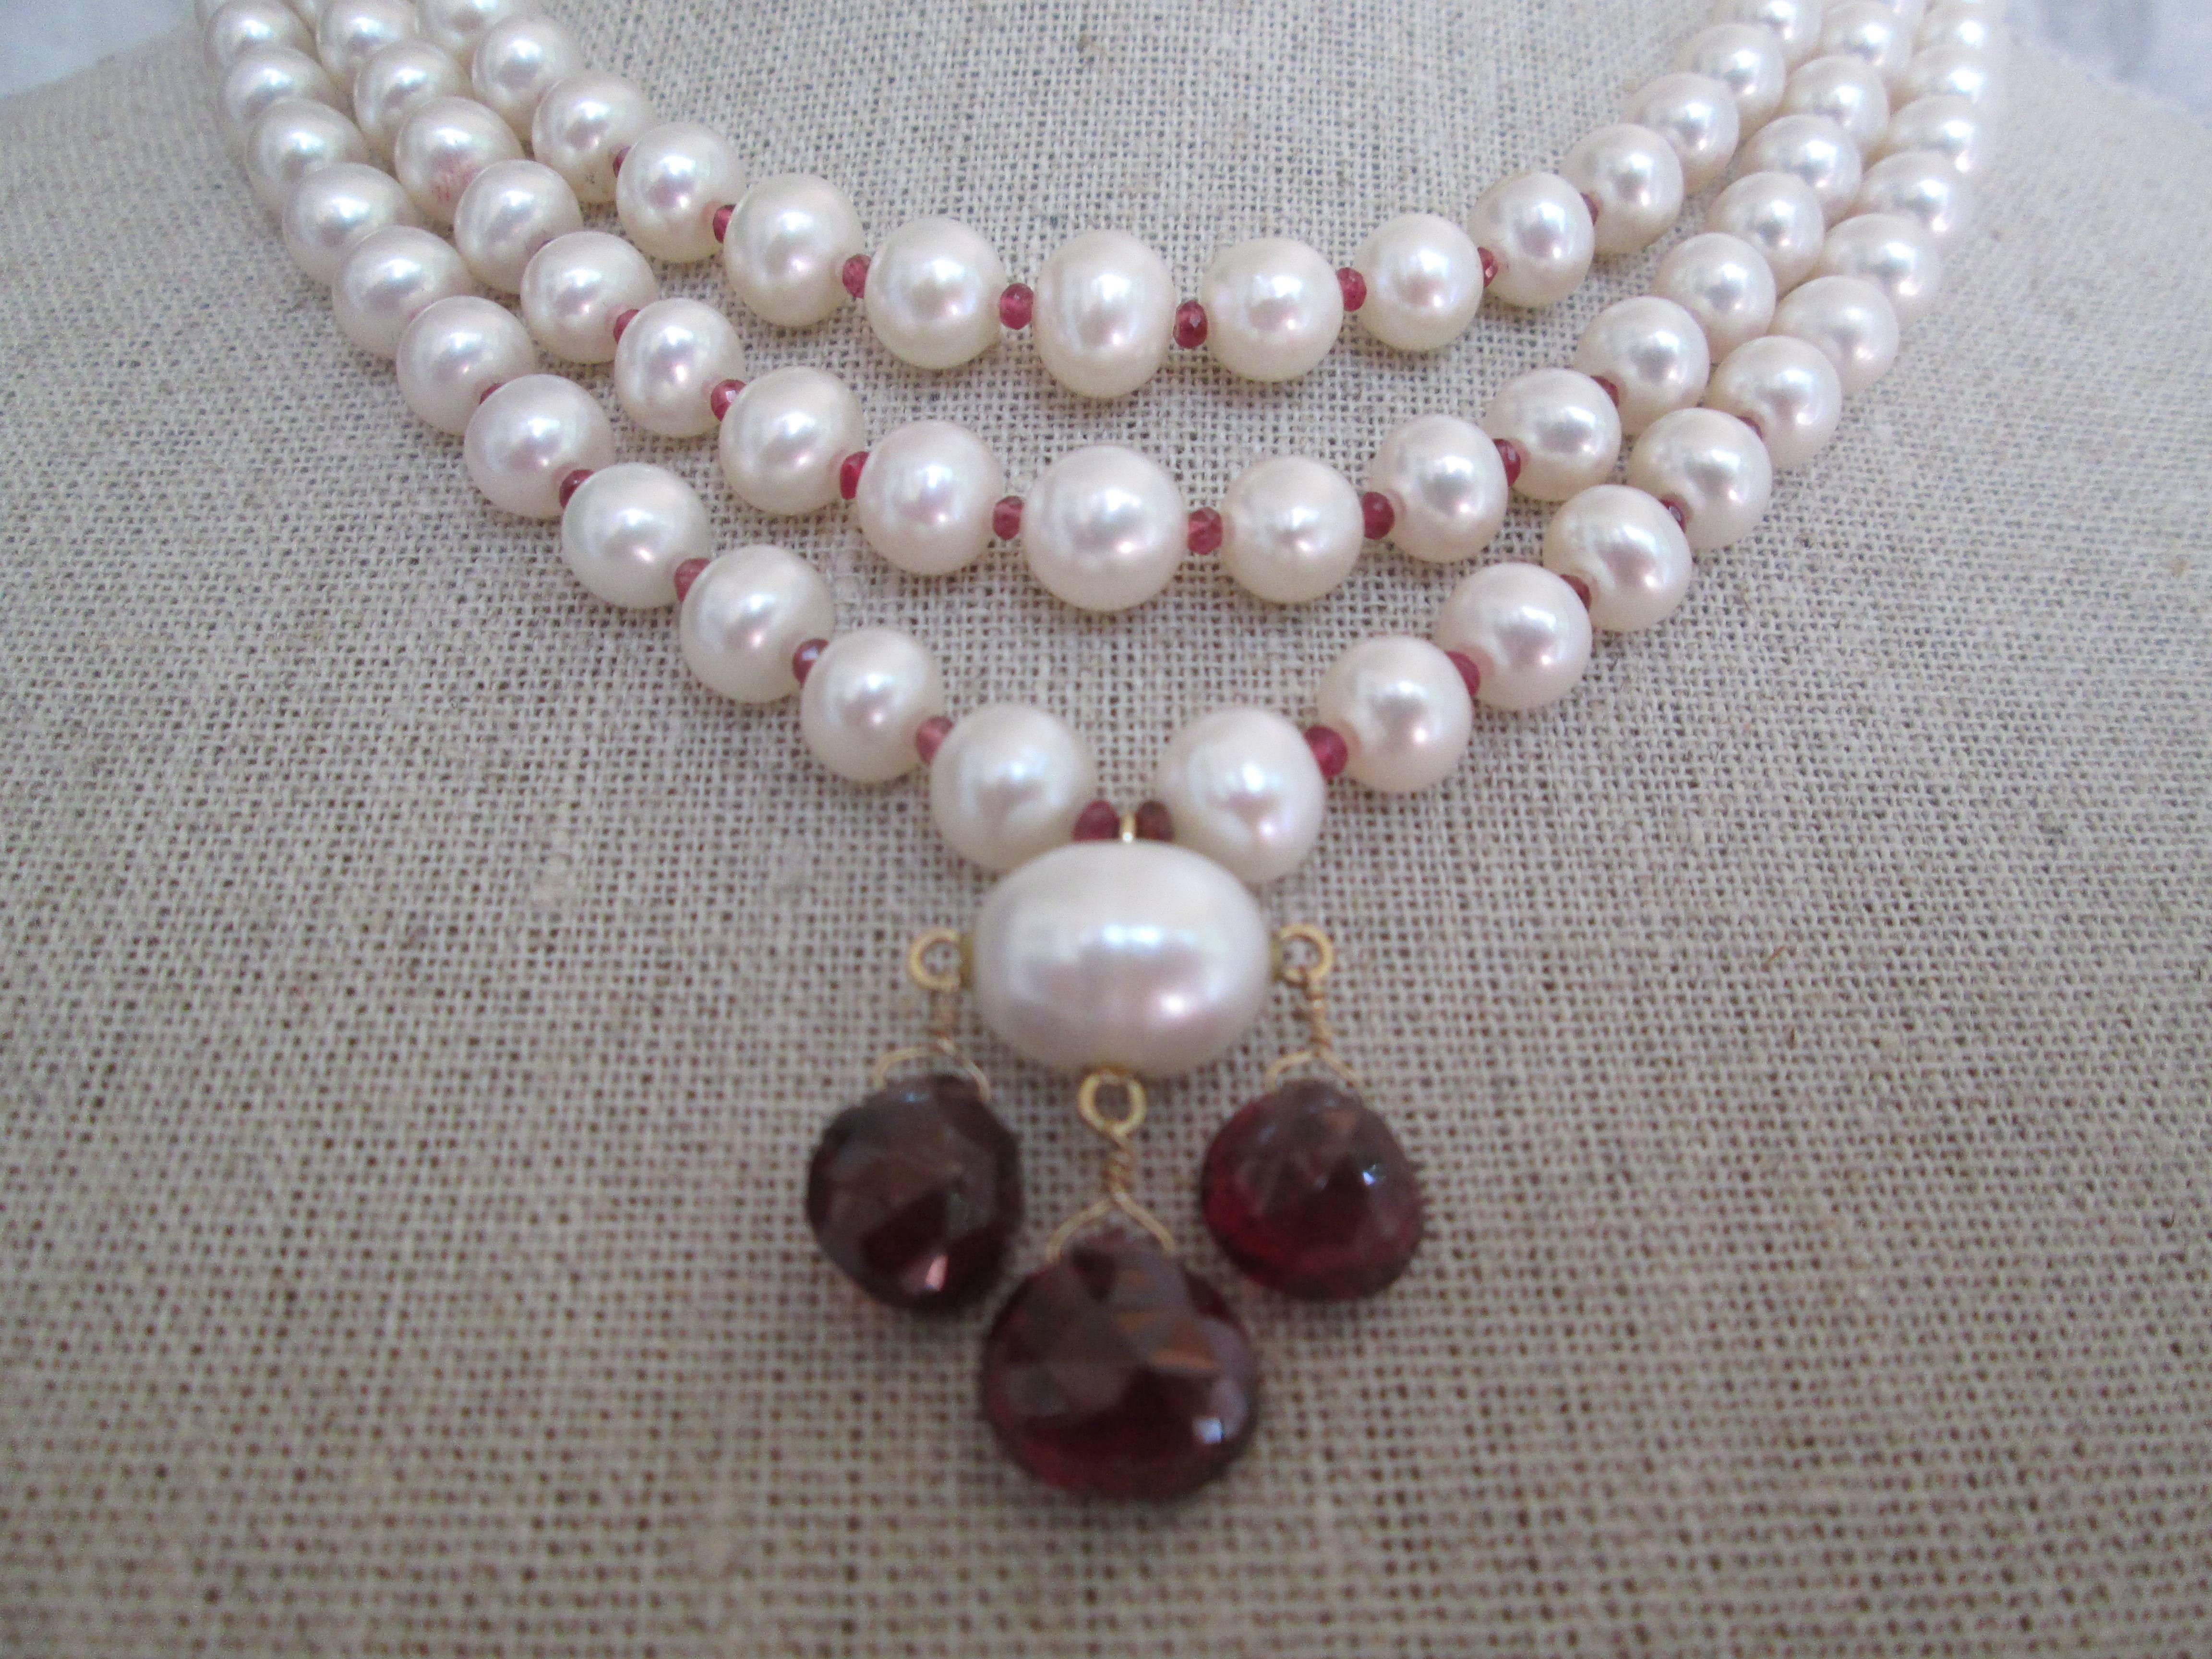 Marina J. 3 Strands of Graduated Pearl Necklace with Garnet & 14k Yellow Gold 2